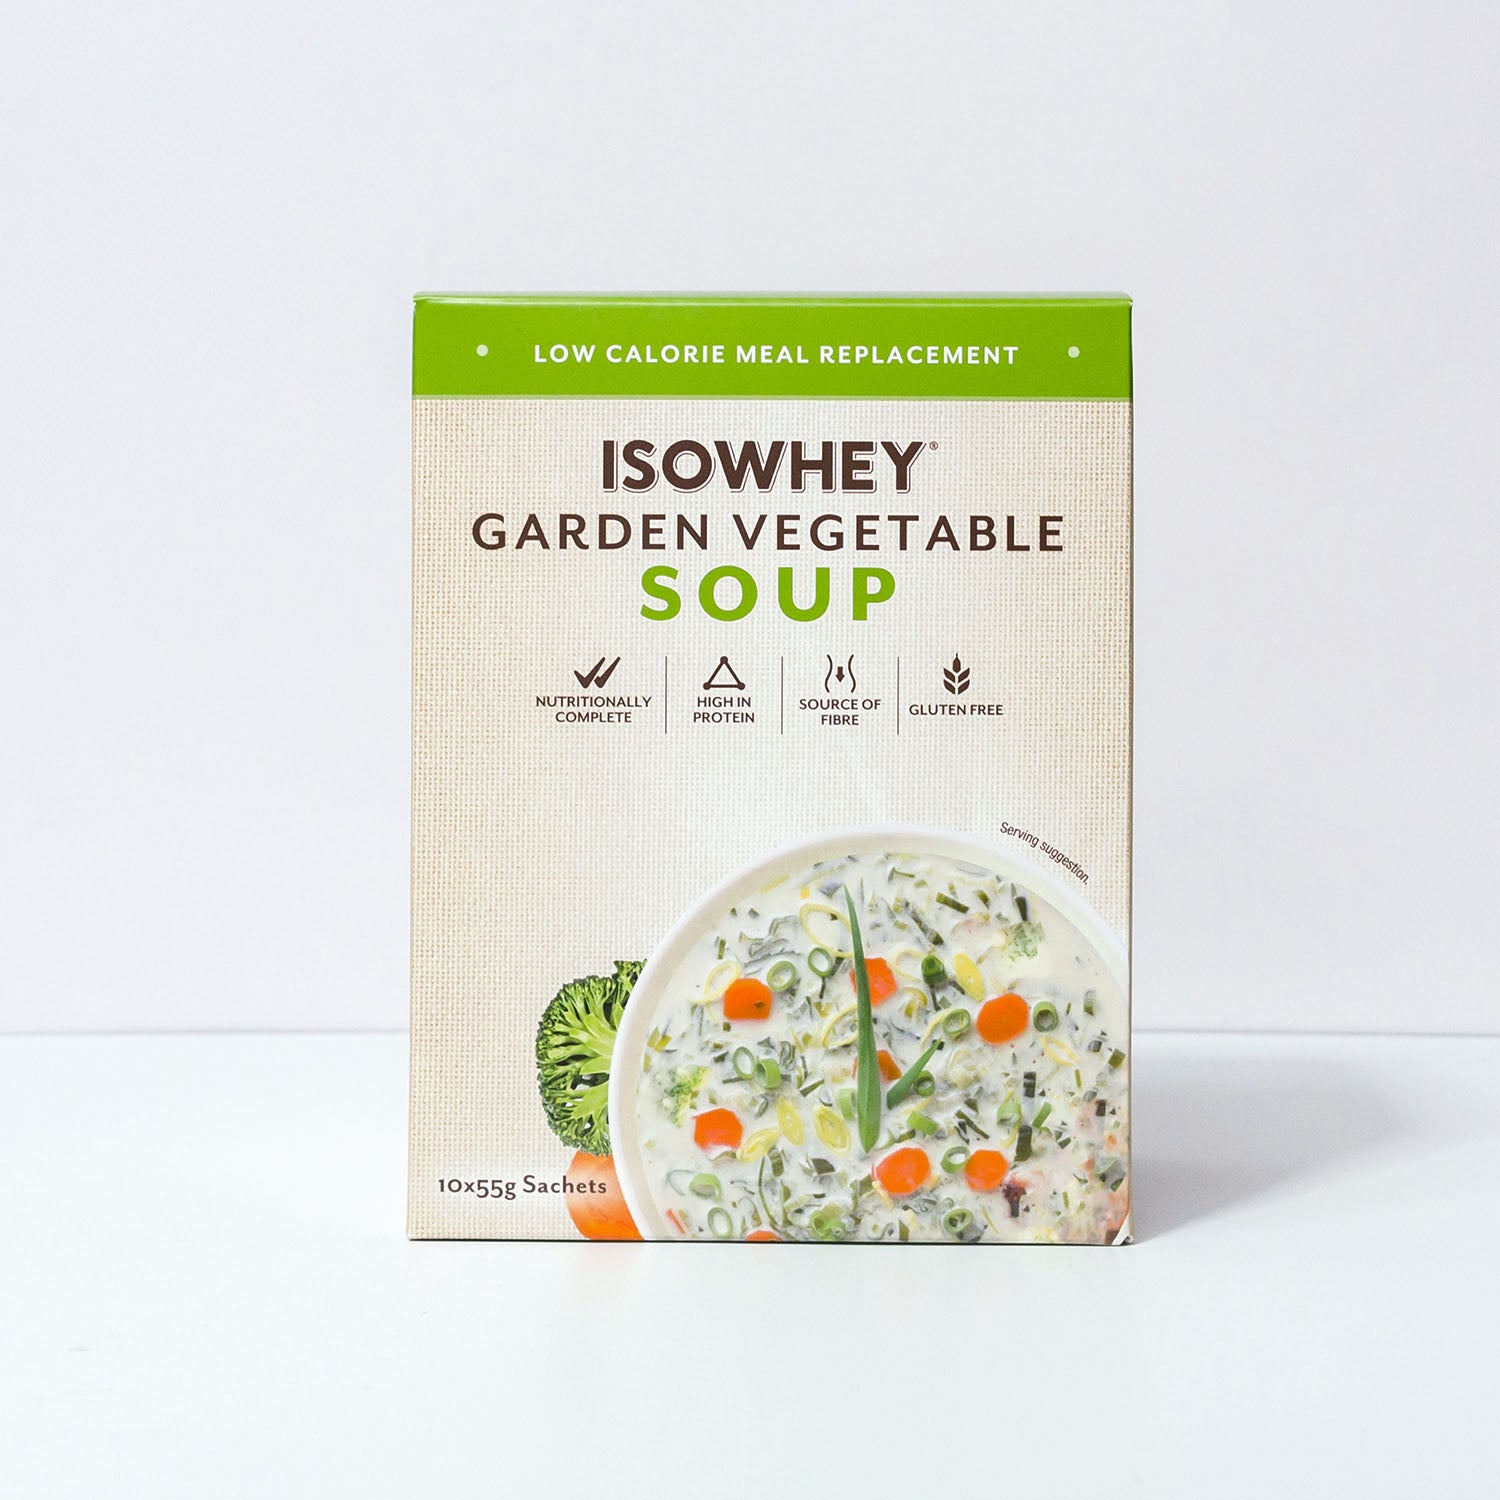 IsoWhey Vegetable Soup